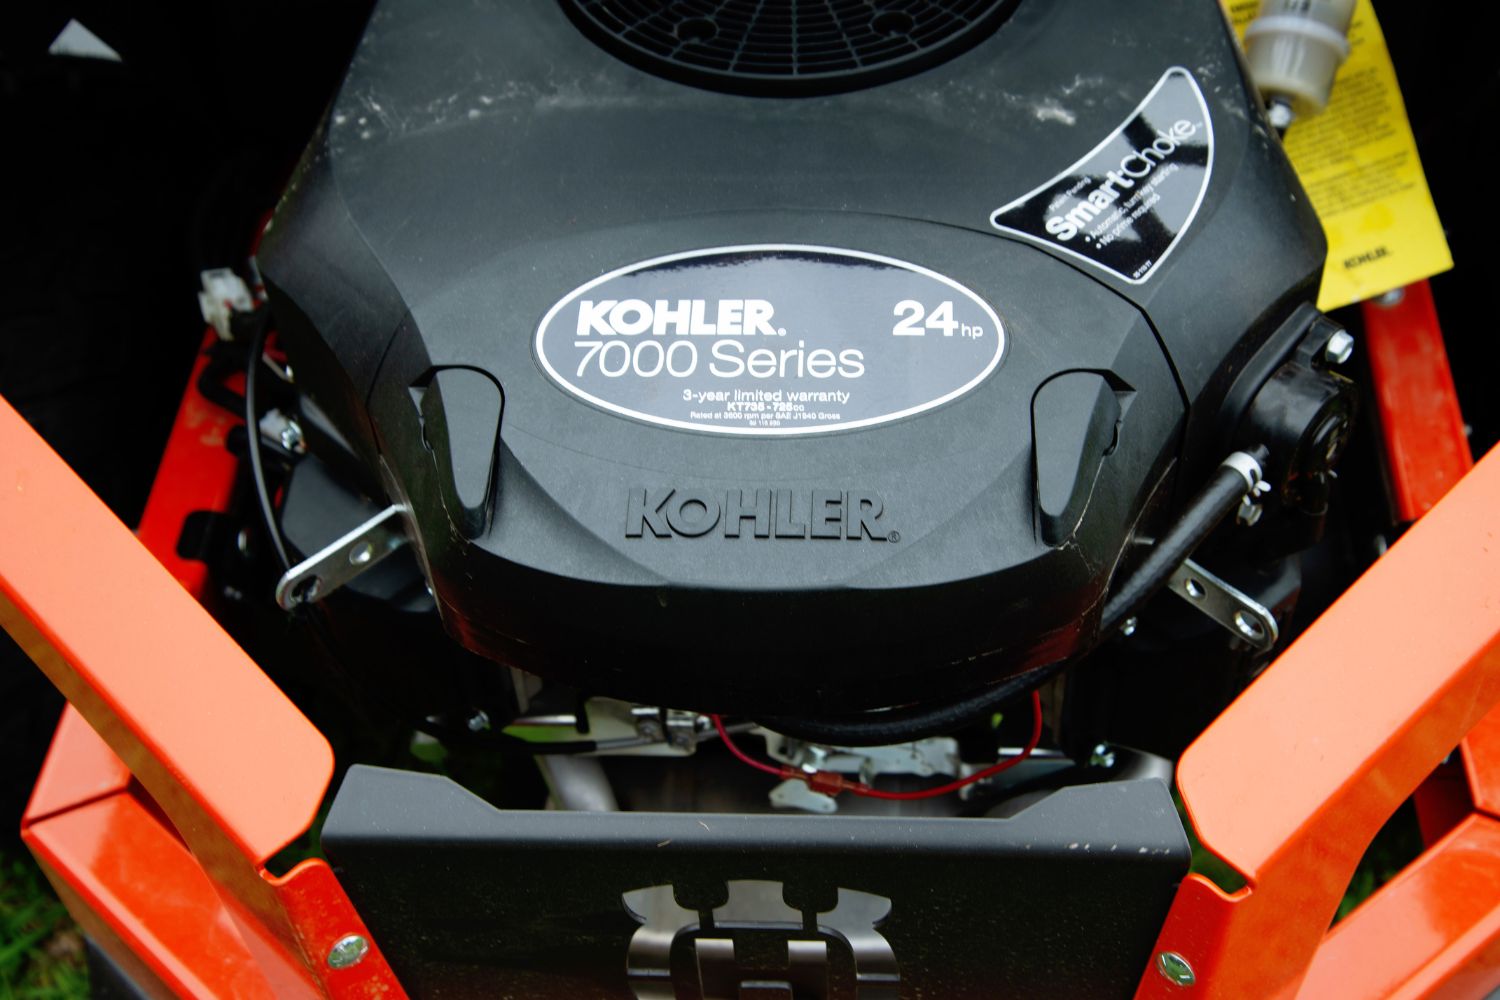 A close-up of the 24 hp 7000 series Kohler engine in the Husqvarna XCite 350 zero turn riding mower